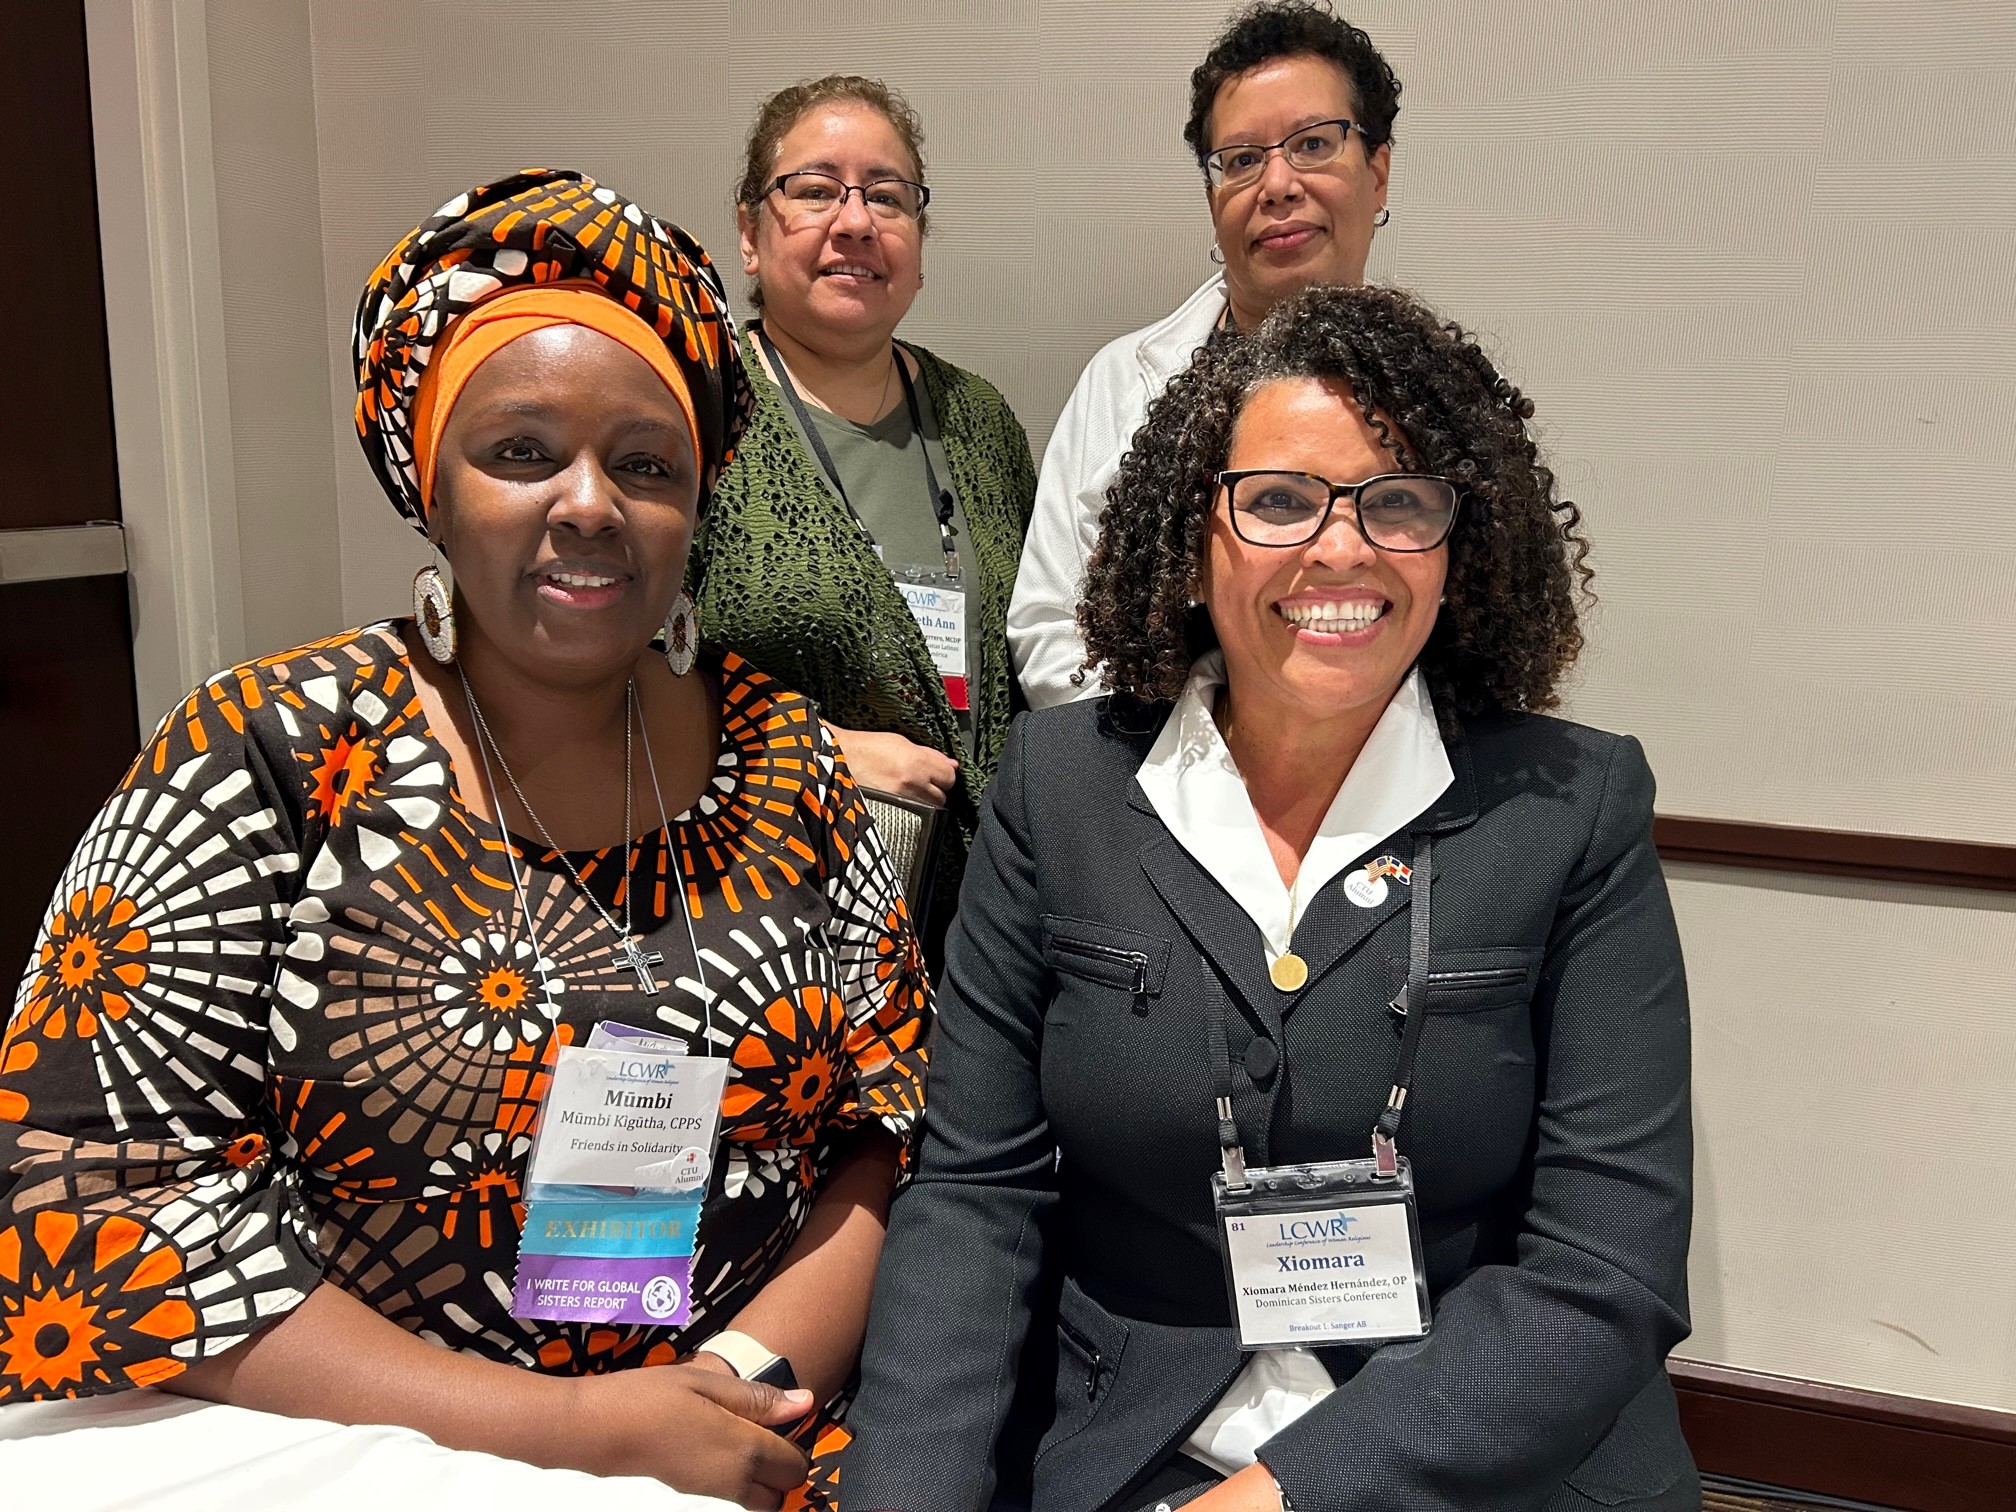 Panelists for the afternoon session on intercultural leadership: seated, Precious Blood Sr. Mumbi Kigutha and Dominican Sr. Xiomara Méndez-Hernández; standing, Missionary Catechist of Divine Providence Sr. Elizabeth Ann Guerrero and Mercy Sr. Ivette Diaz (Courtesy of Annmarie Sanders)